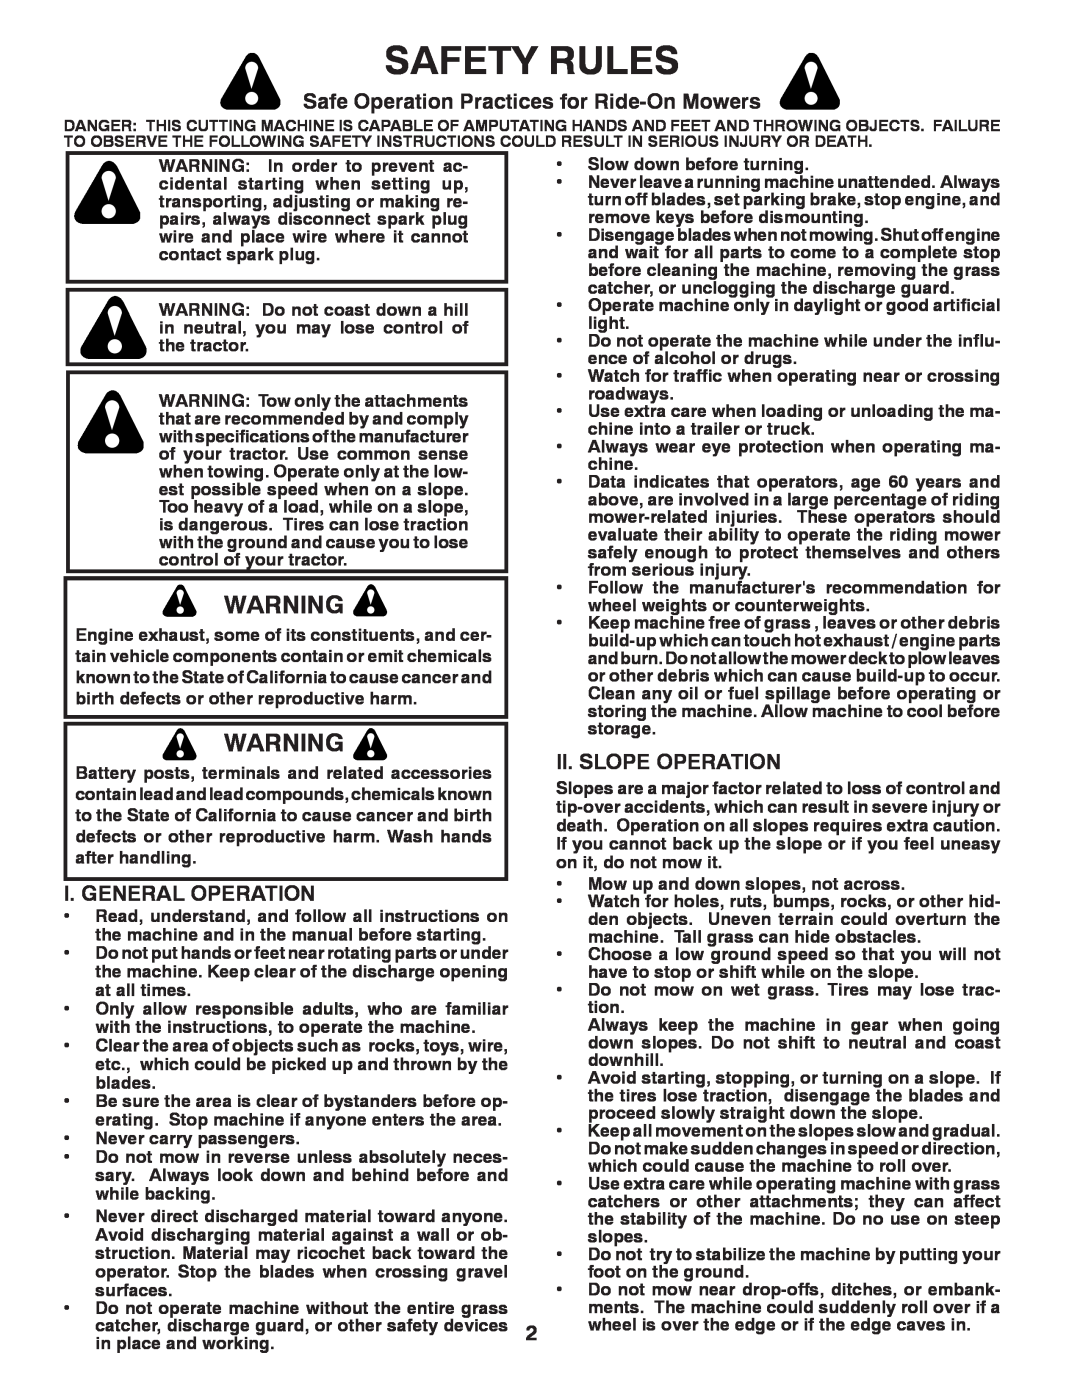 Poulan 96042006001 Safety Rules, Safe Operation Practices for Ride-OnMowers, I. General Operation, Ii. Slope Operation 